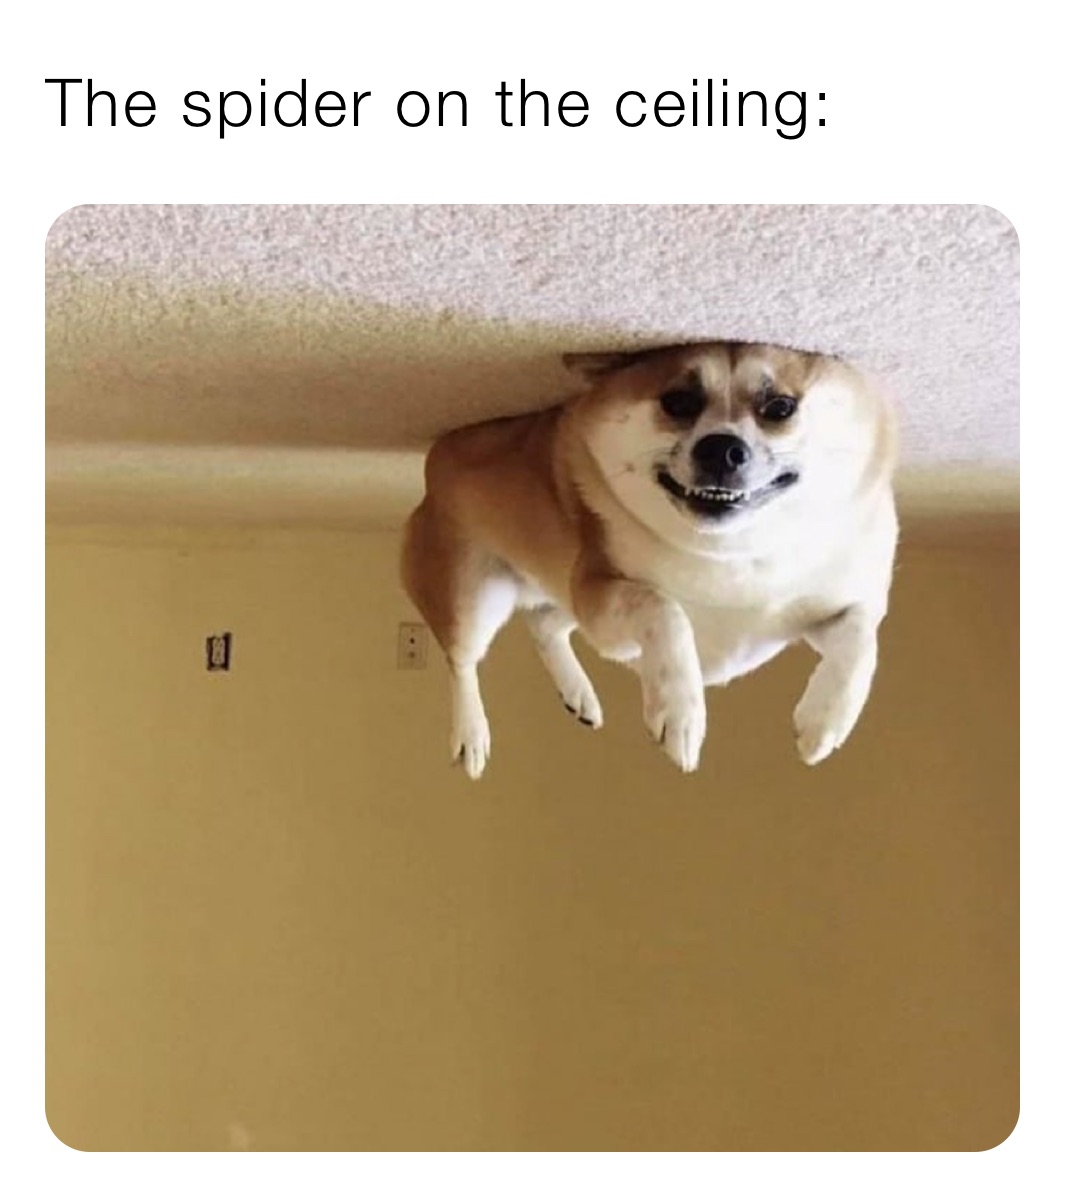 The spider on the ceiling: